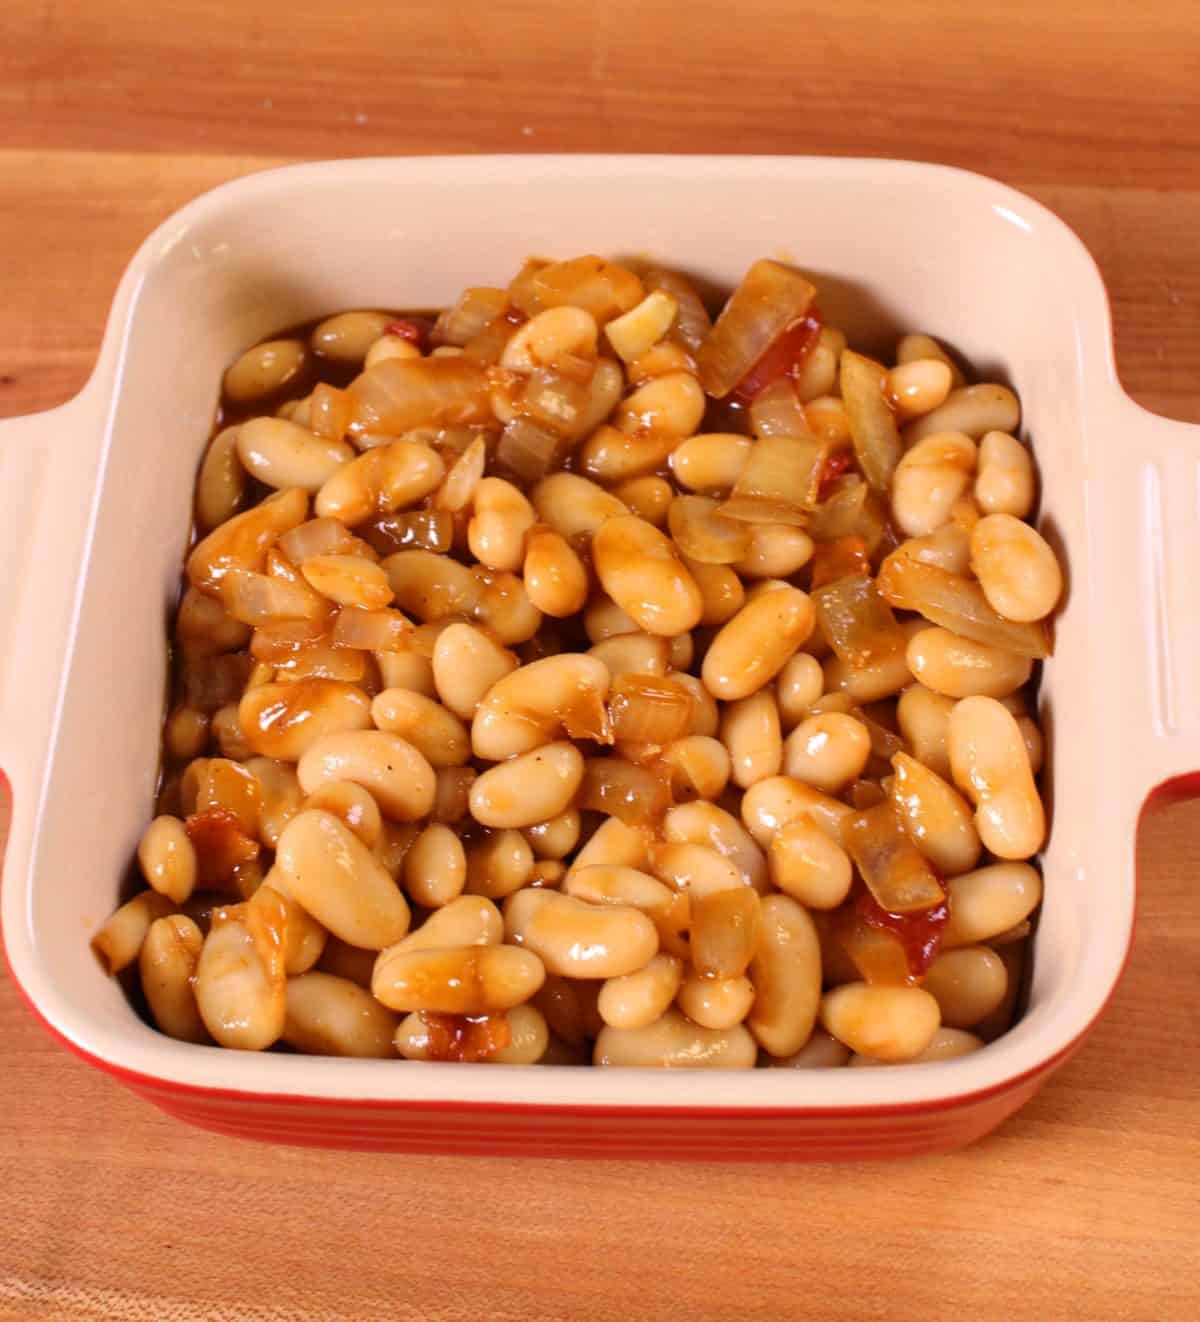 beans with sauce in a small red baking dish.